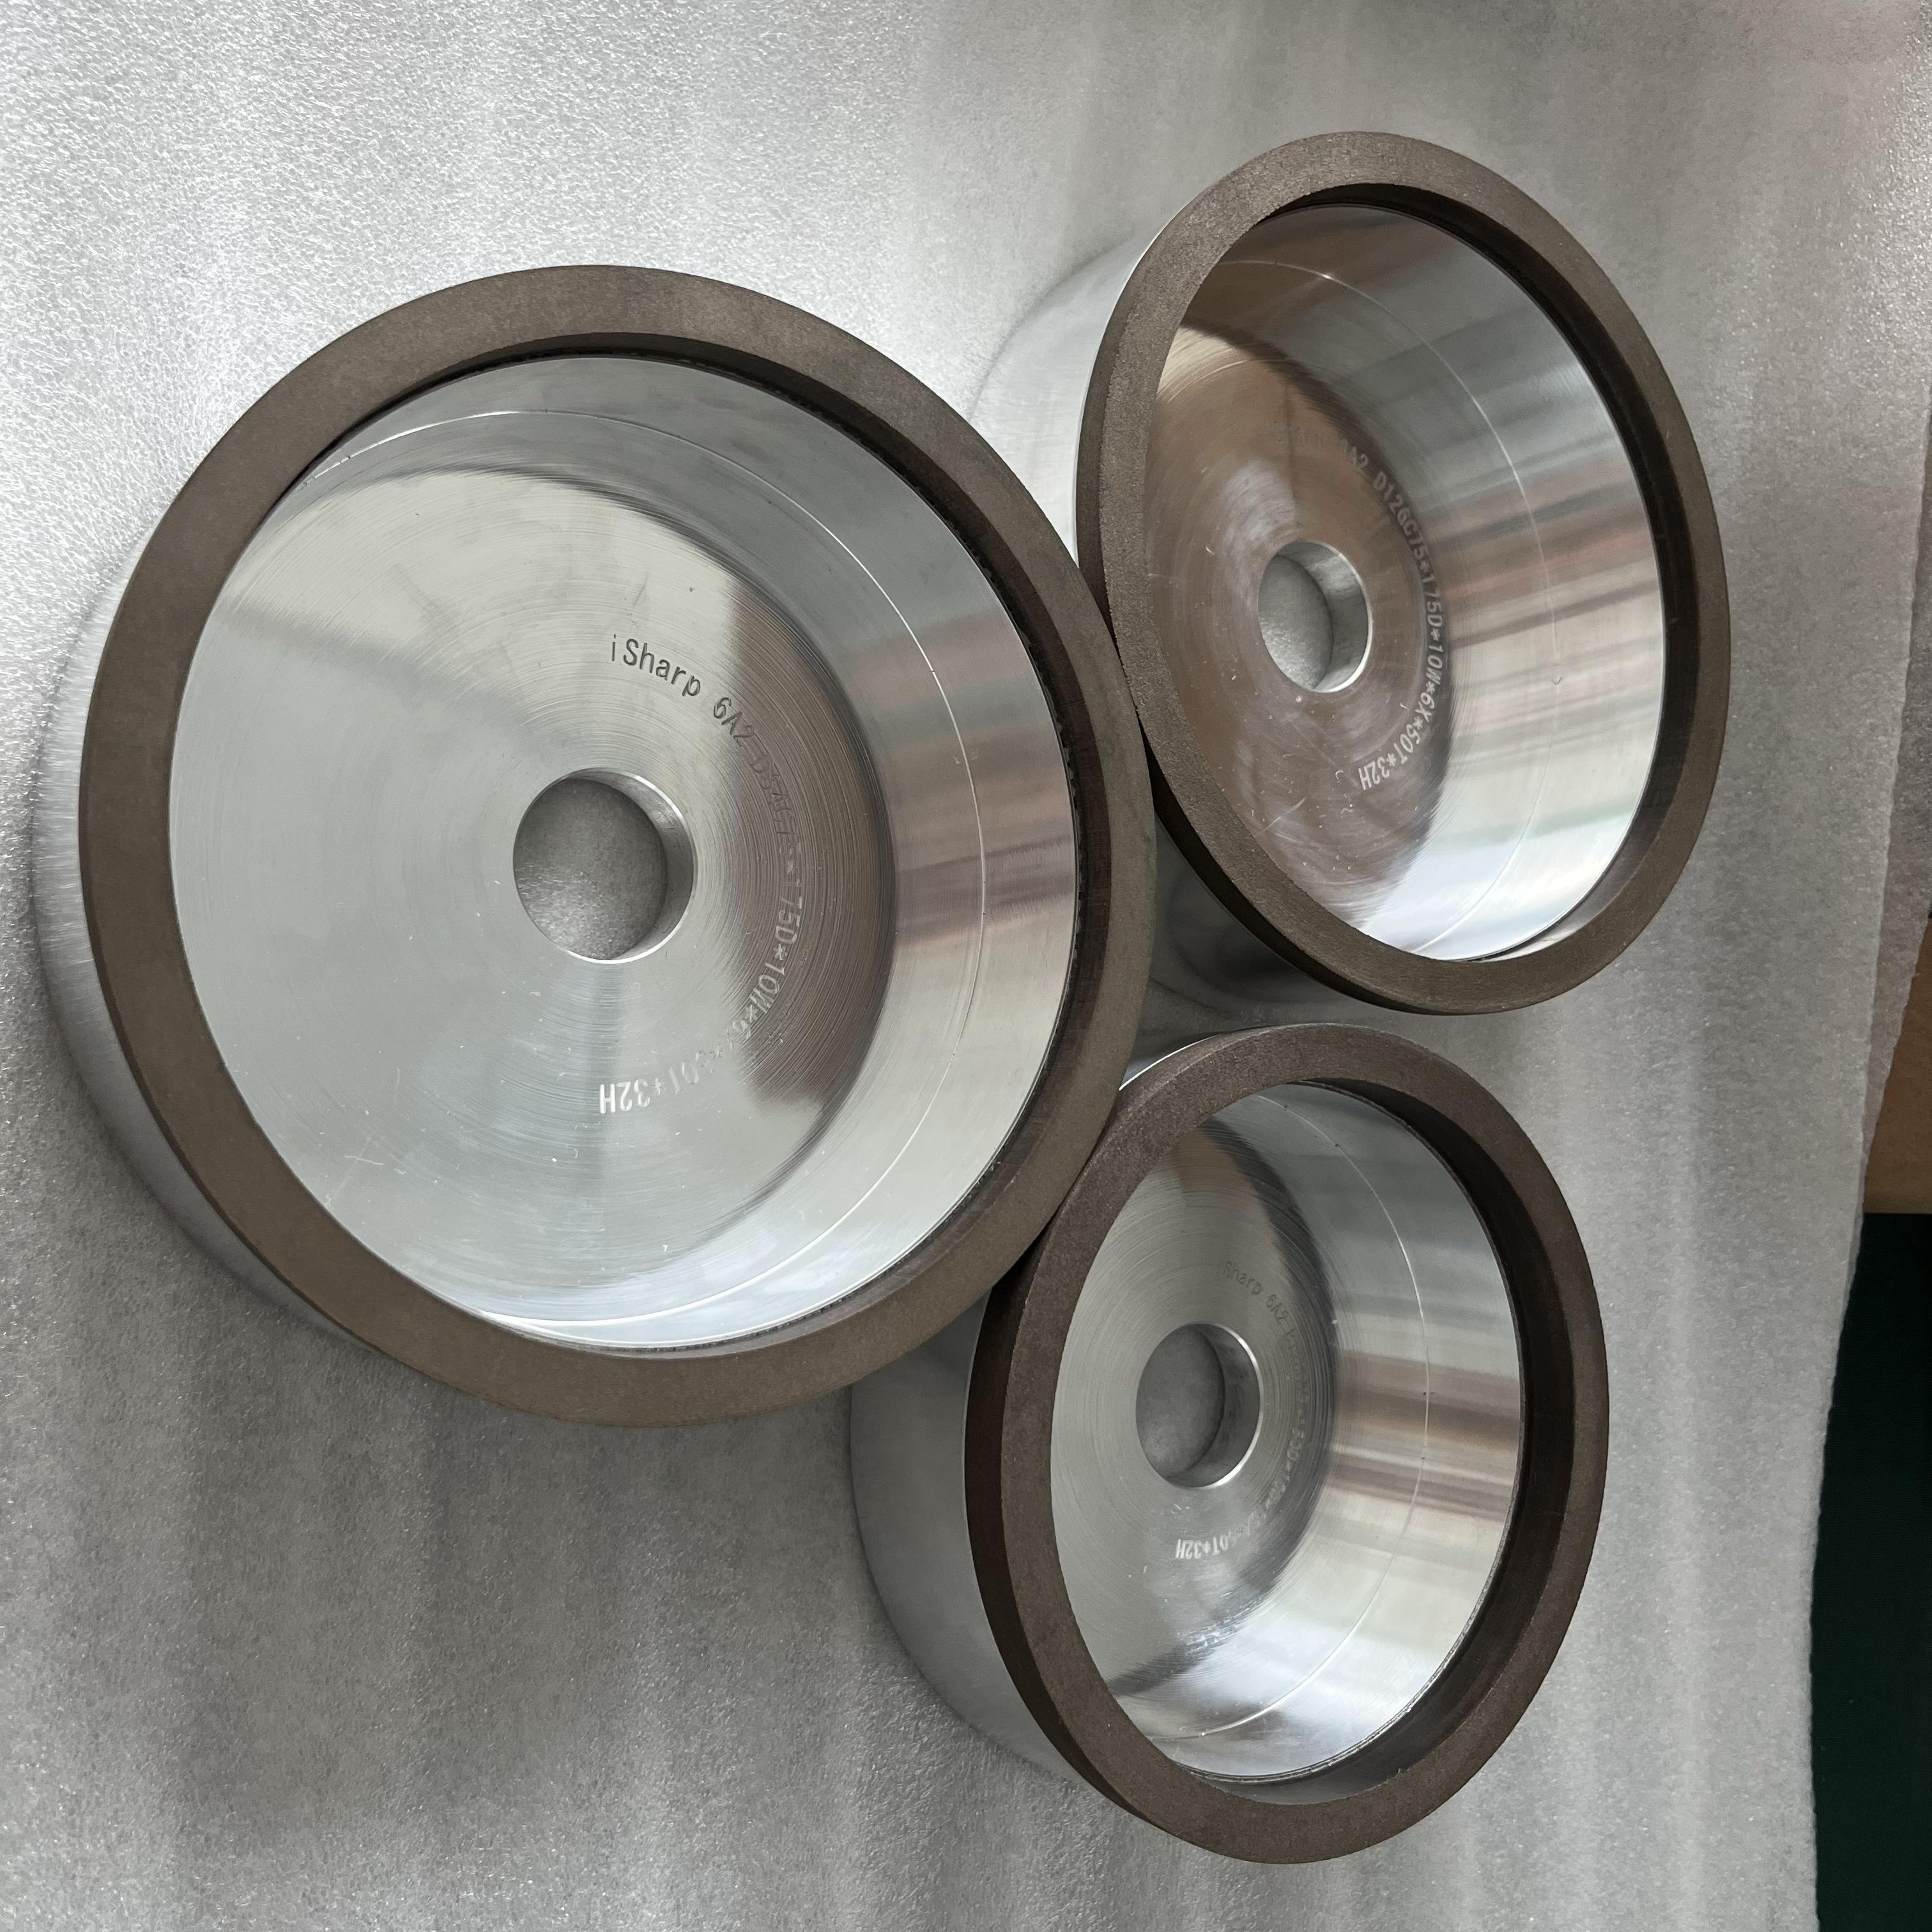 CBN Cup Grinding Wheel